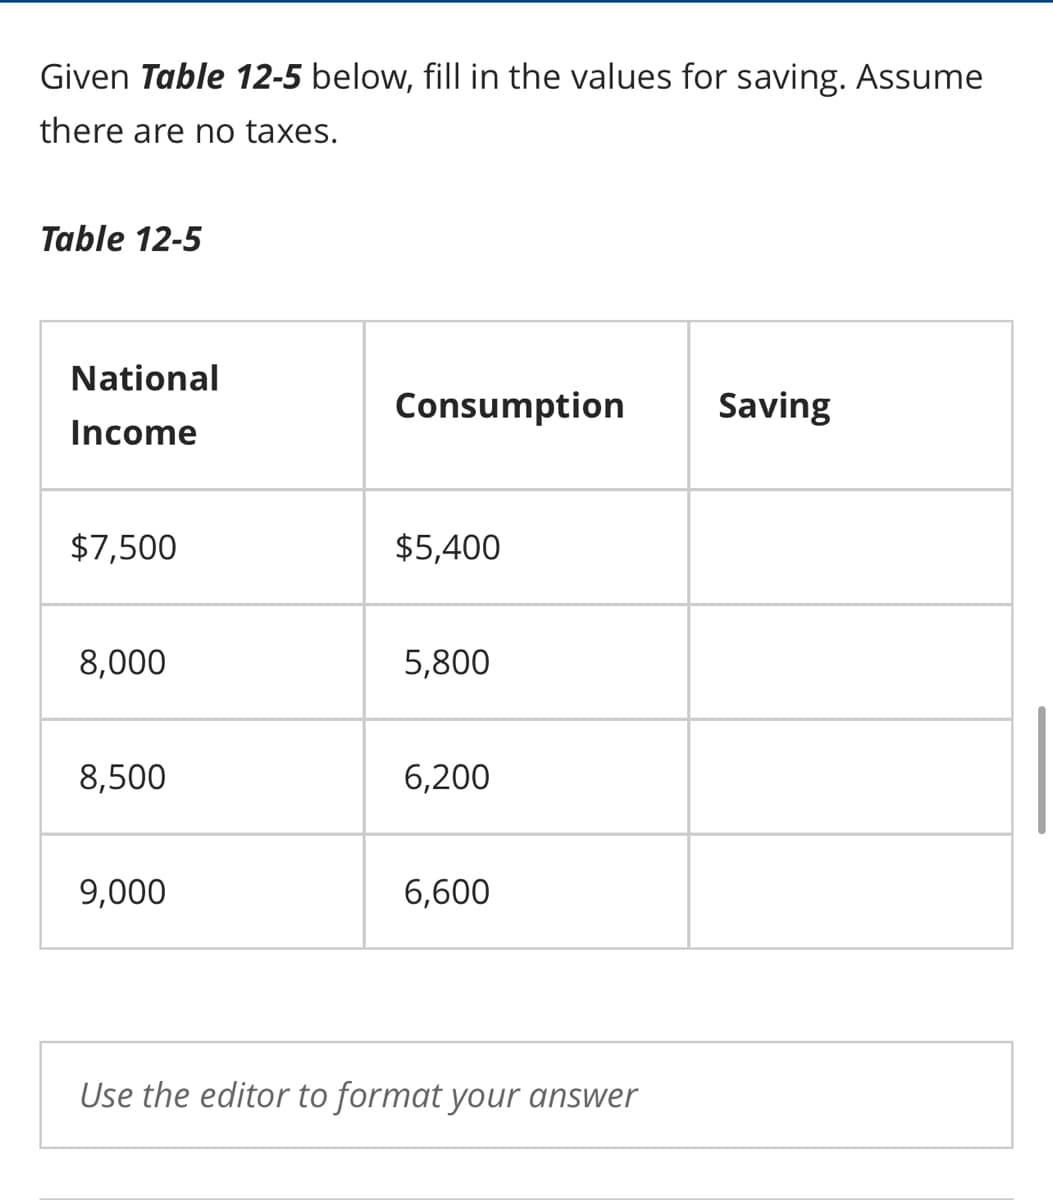 Given Table 12-5 below, fill in the values for saving. Assume
there are no taxes.
Table 12-5
National
Income
$7,500
8,000
8,500
9,000
Consumption
$5,400
5,800
6,200
6,600
Use the editor to format your answer
Saving